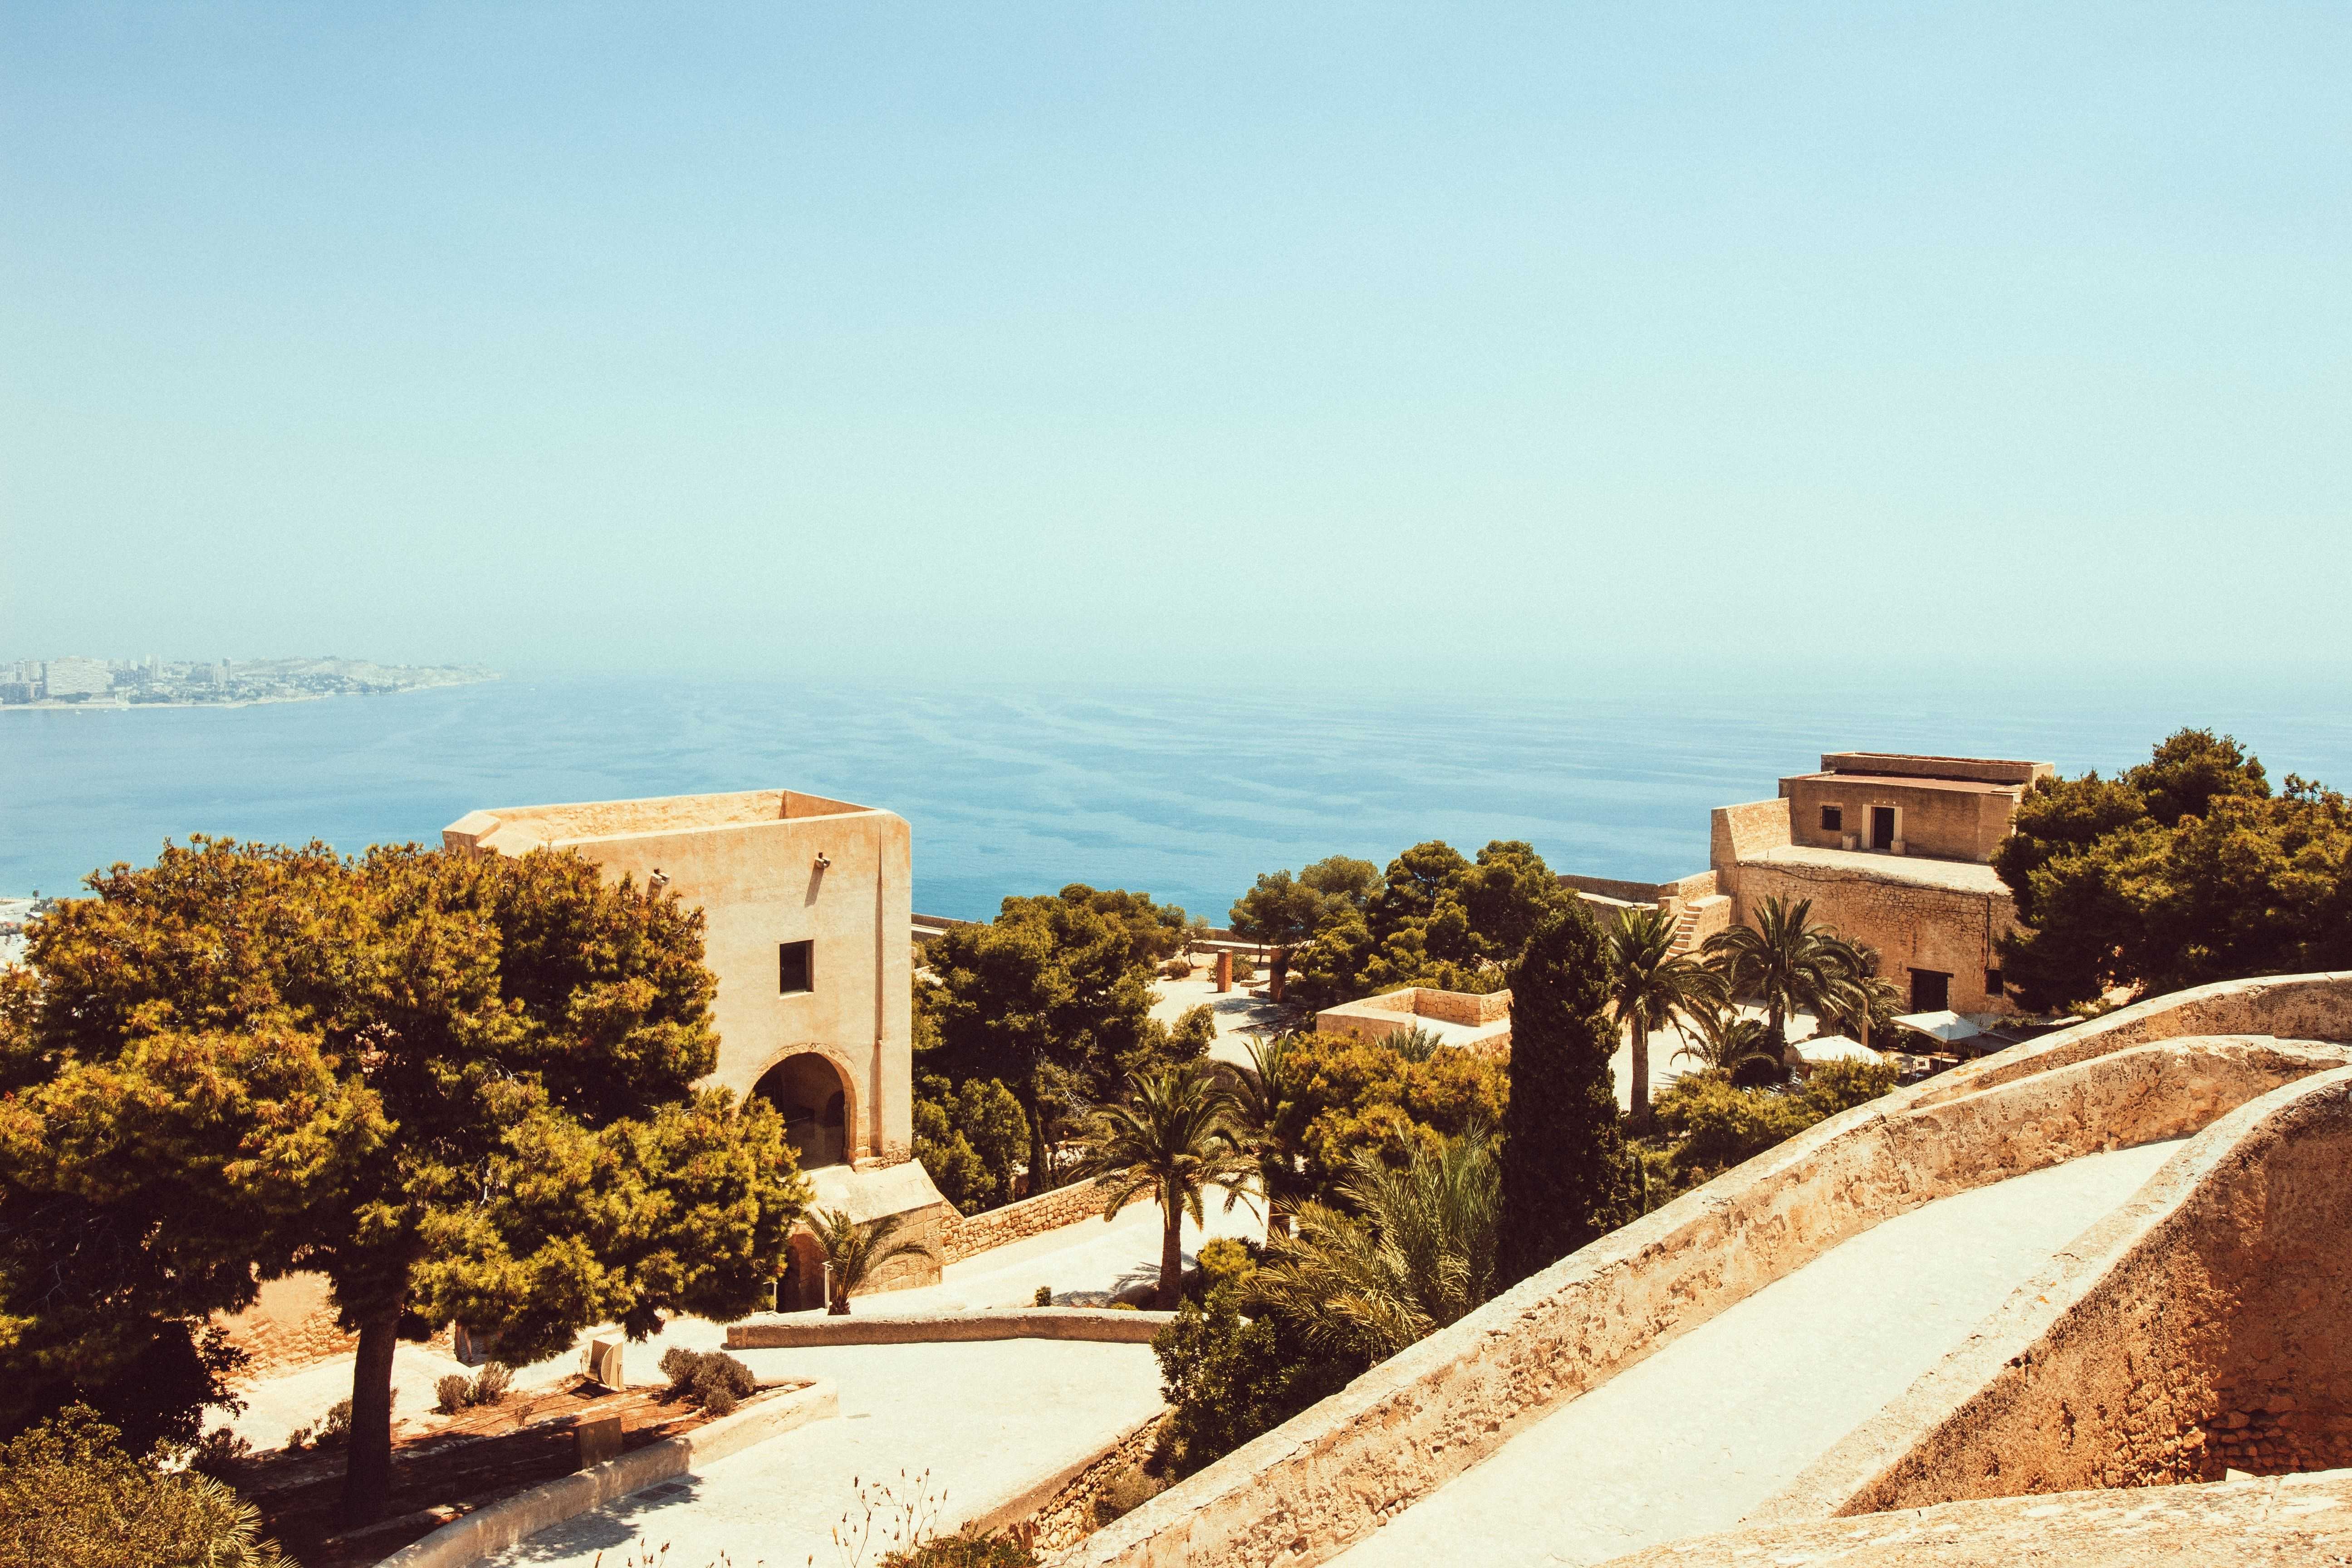 Things to Do in Malaga